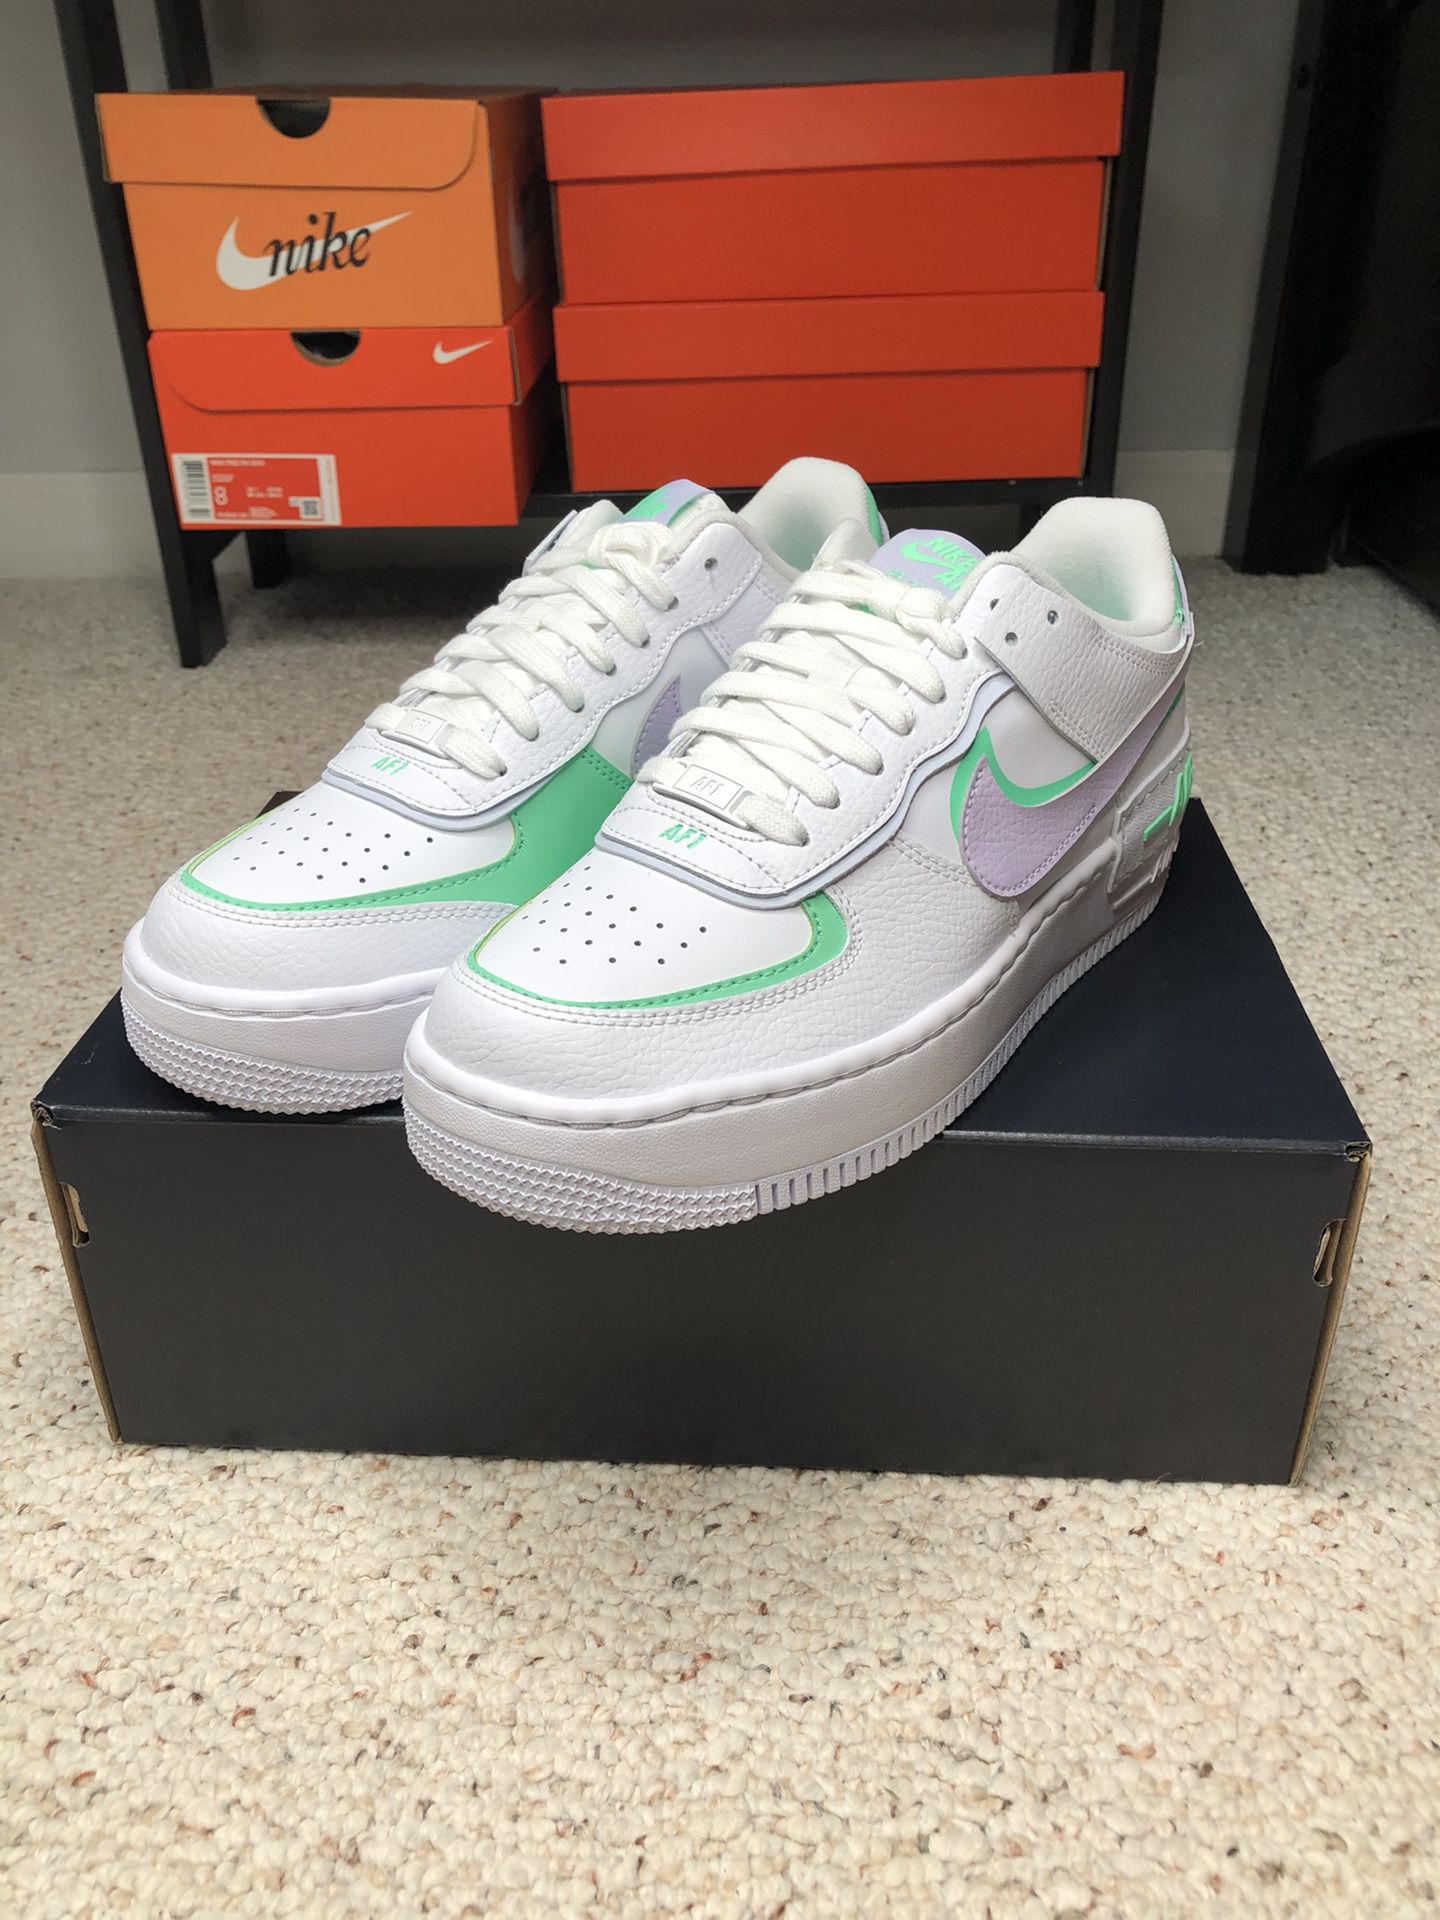 Nike Air Force 1 Shadow Low White Lilac Green Women's Sneakers